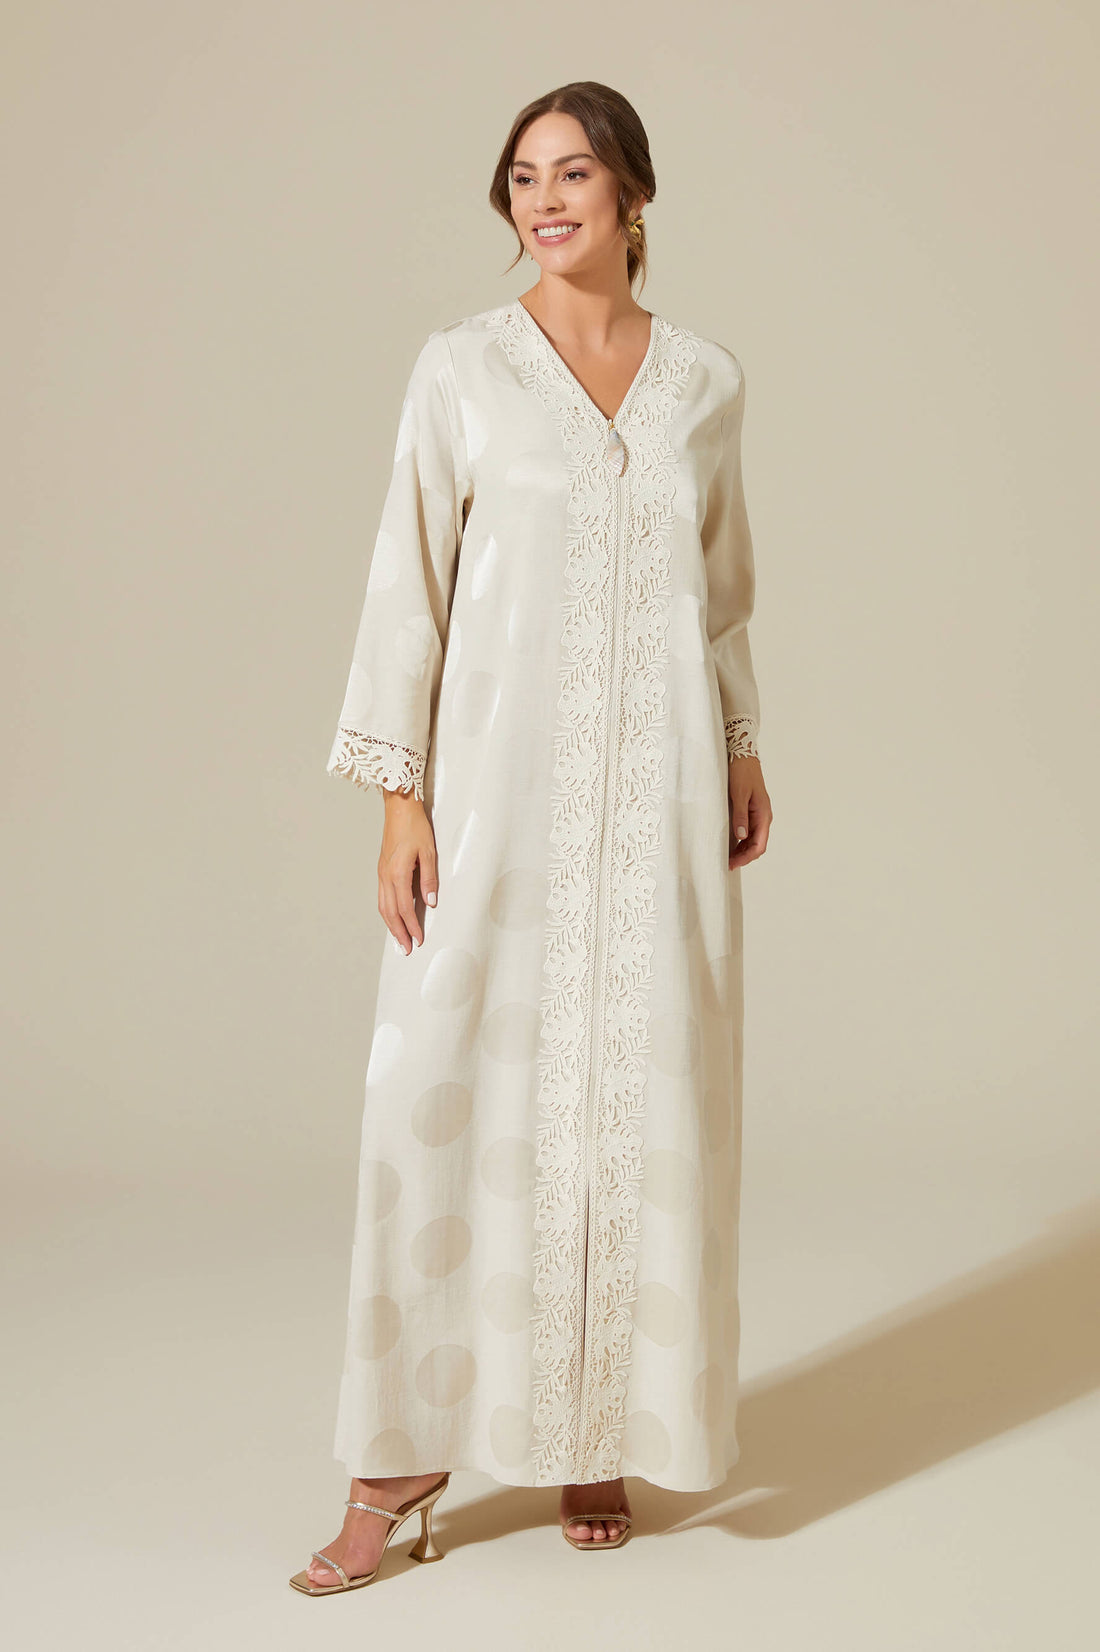 Luv - Trimmed Linen Long Zippered Dress - Beige with Dots